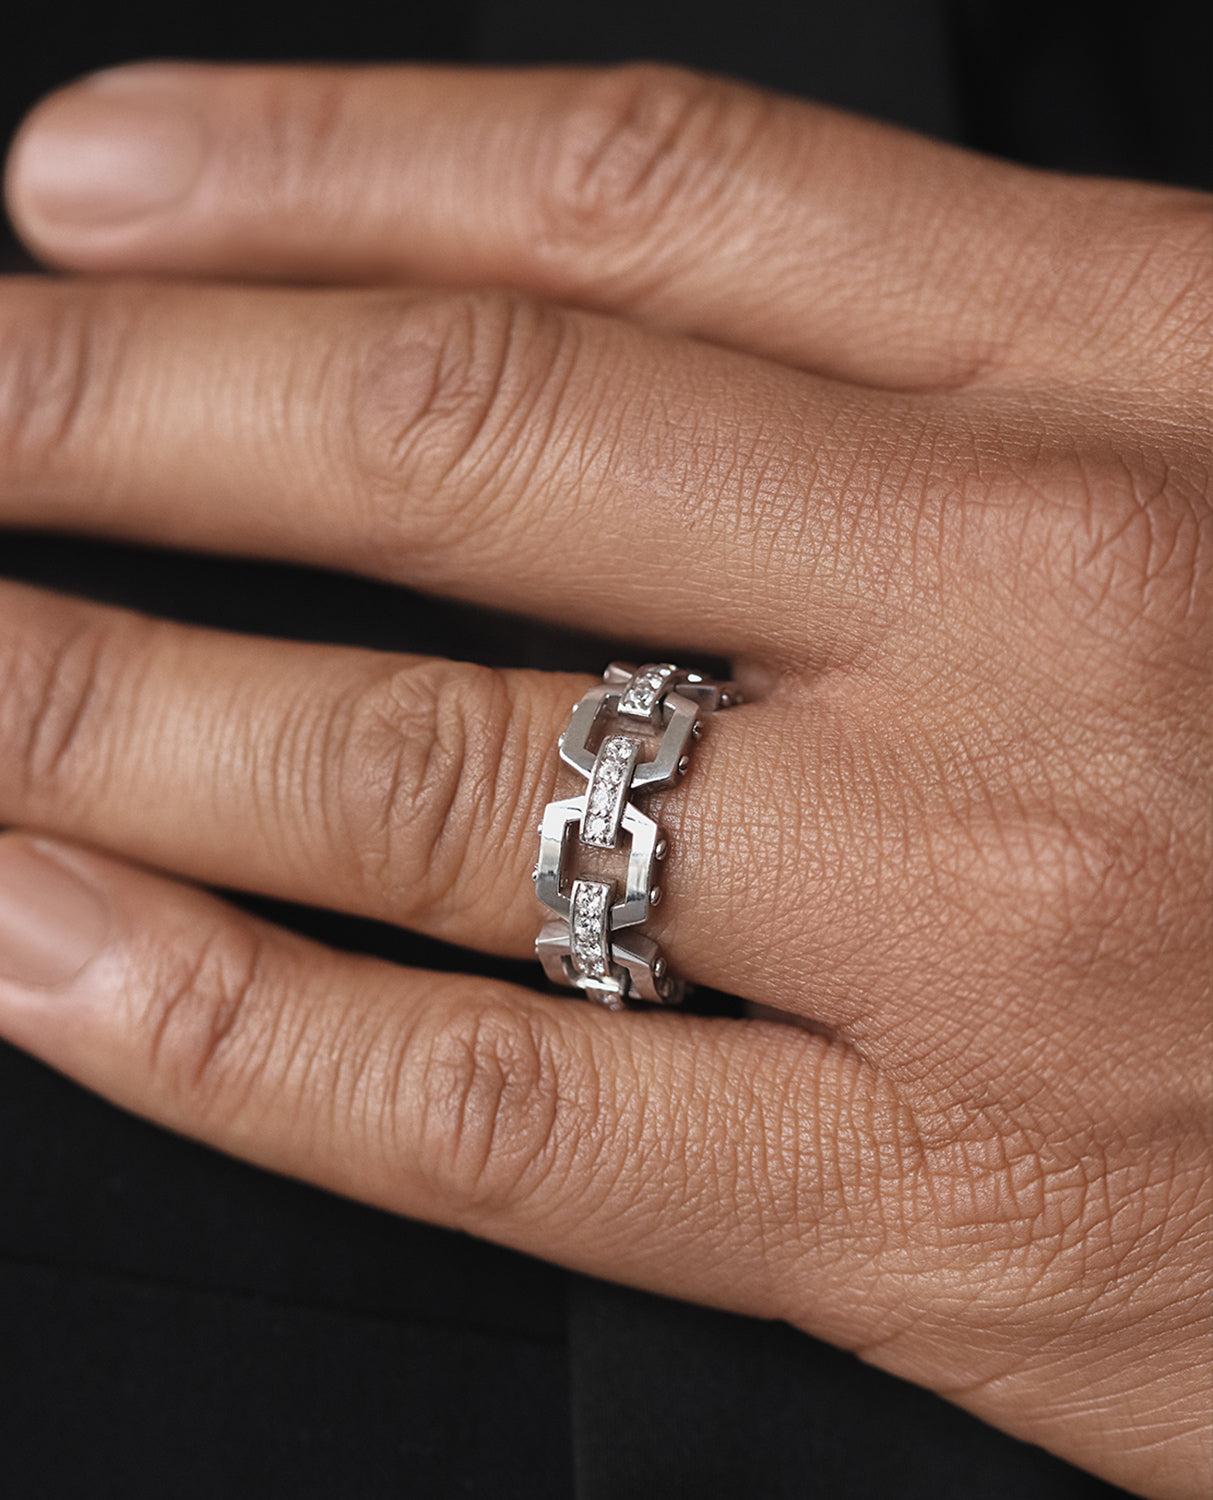 The grand design of this ring is a fusion of two different styles: contemporary classic and cutting-edge modern, all rendered in a gorgeous 0.60ct white diamond pave setting and metals with very fine attention to the detail. Ready to Ship rings are